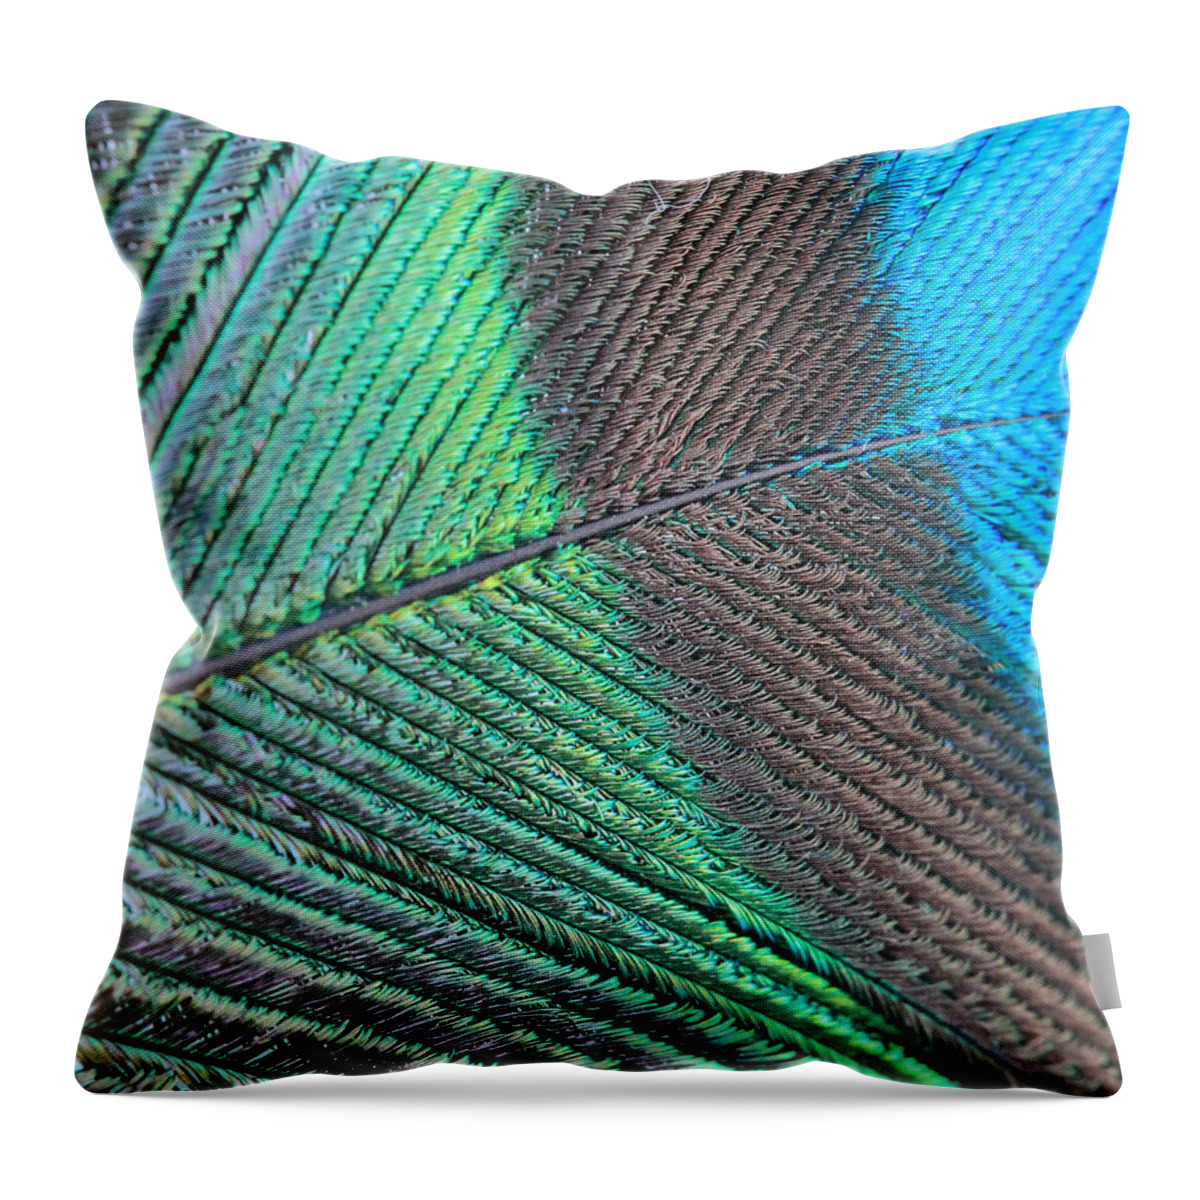 Peacock Throw Pillow featuring the photograph Blue And Green Feathers by Angela Murdock